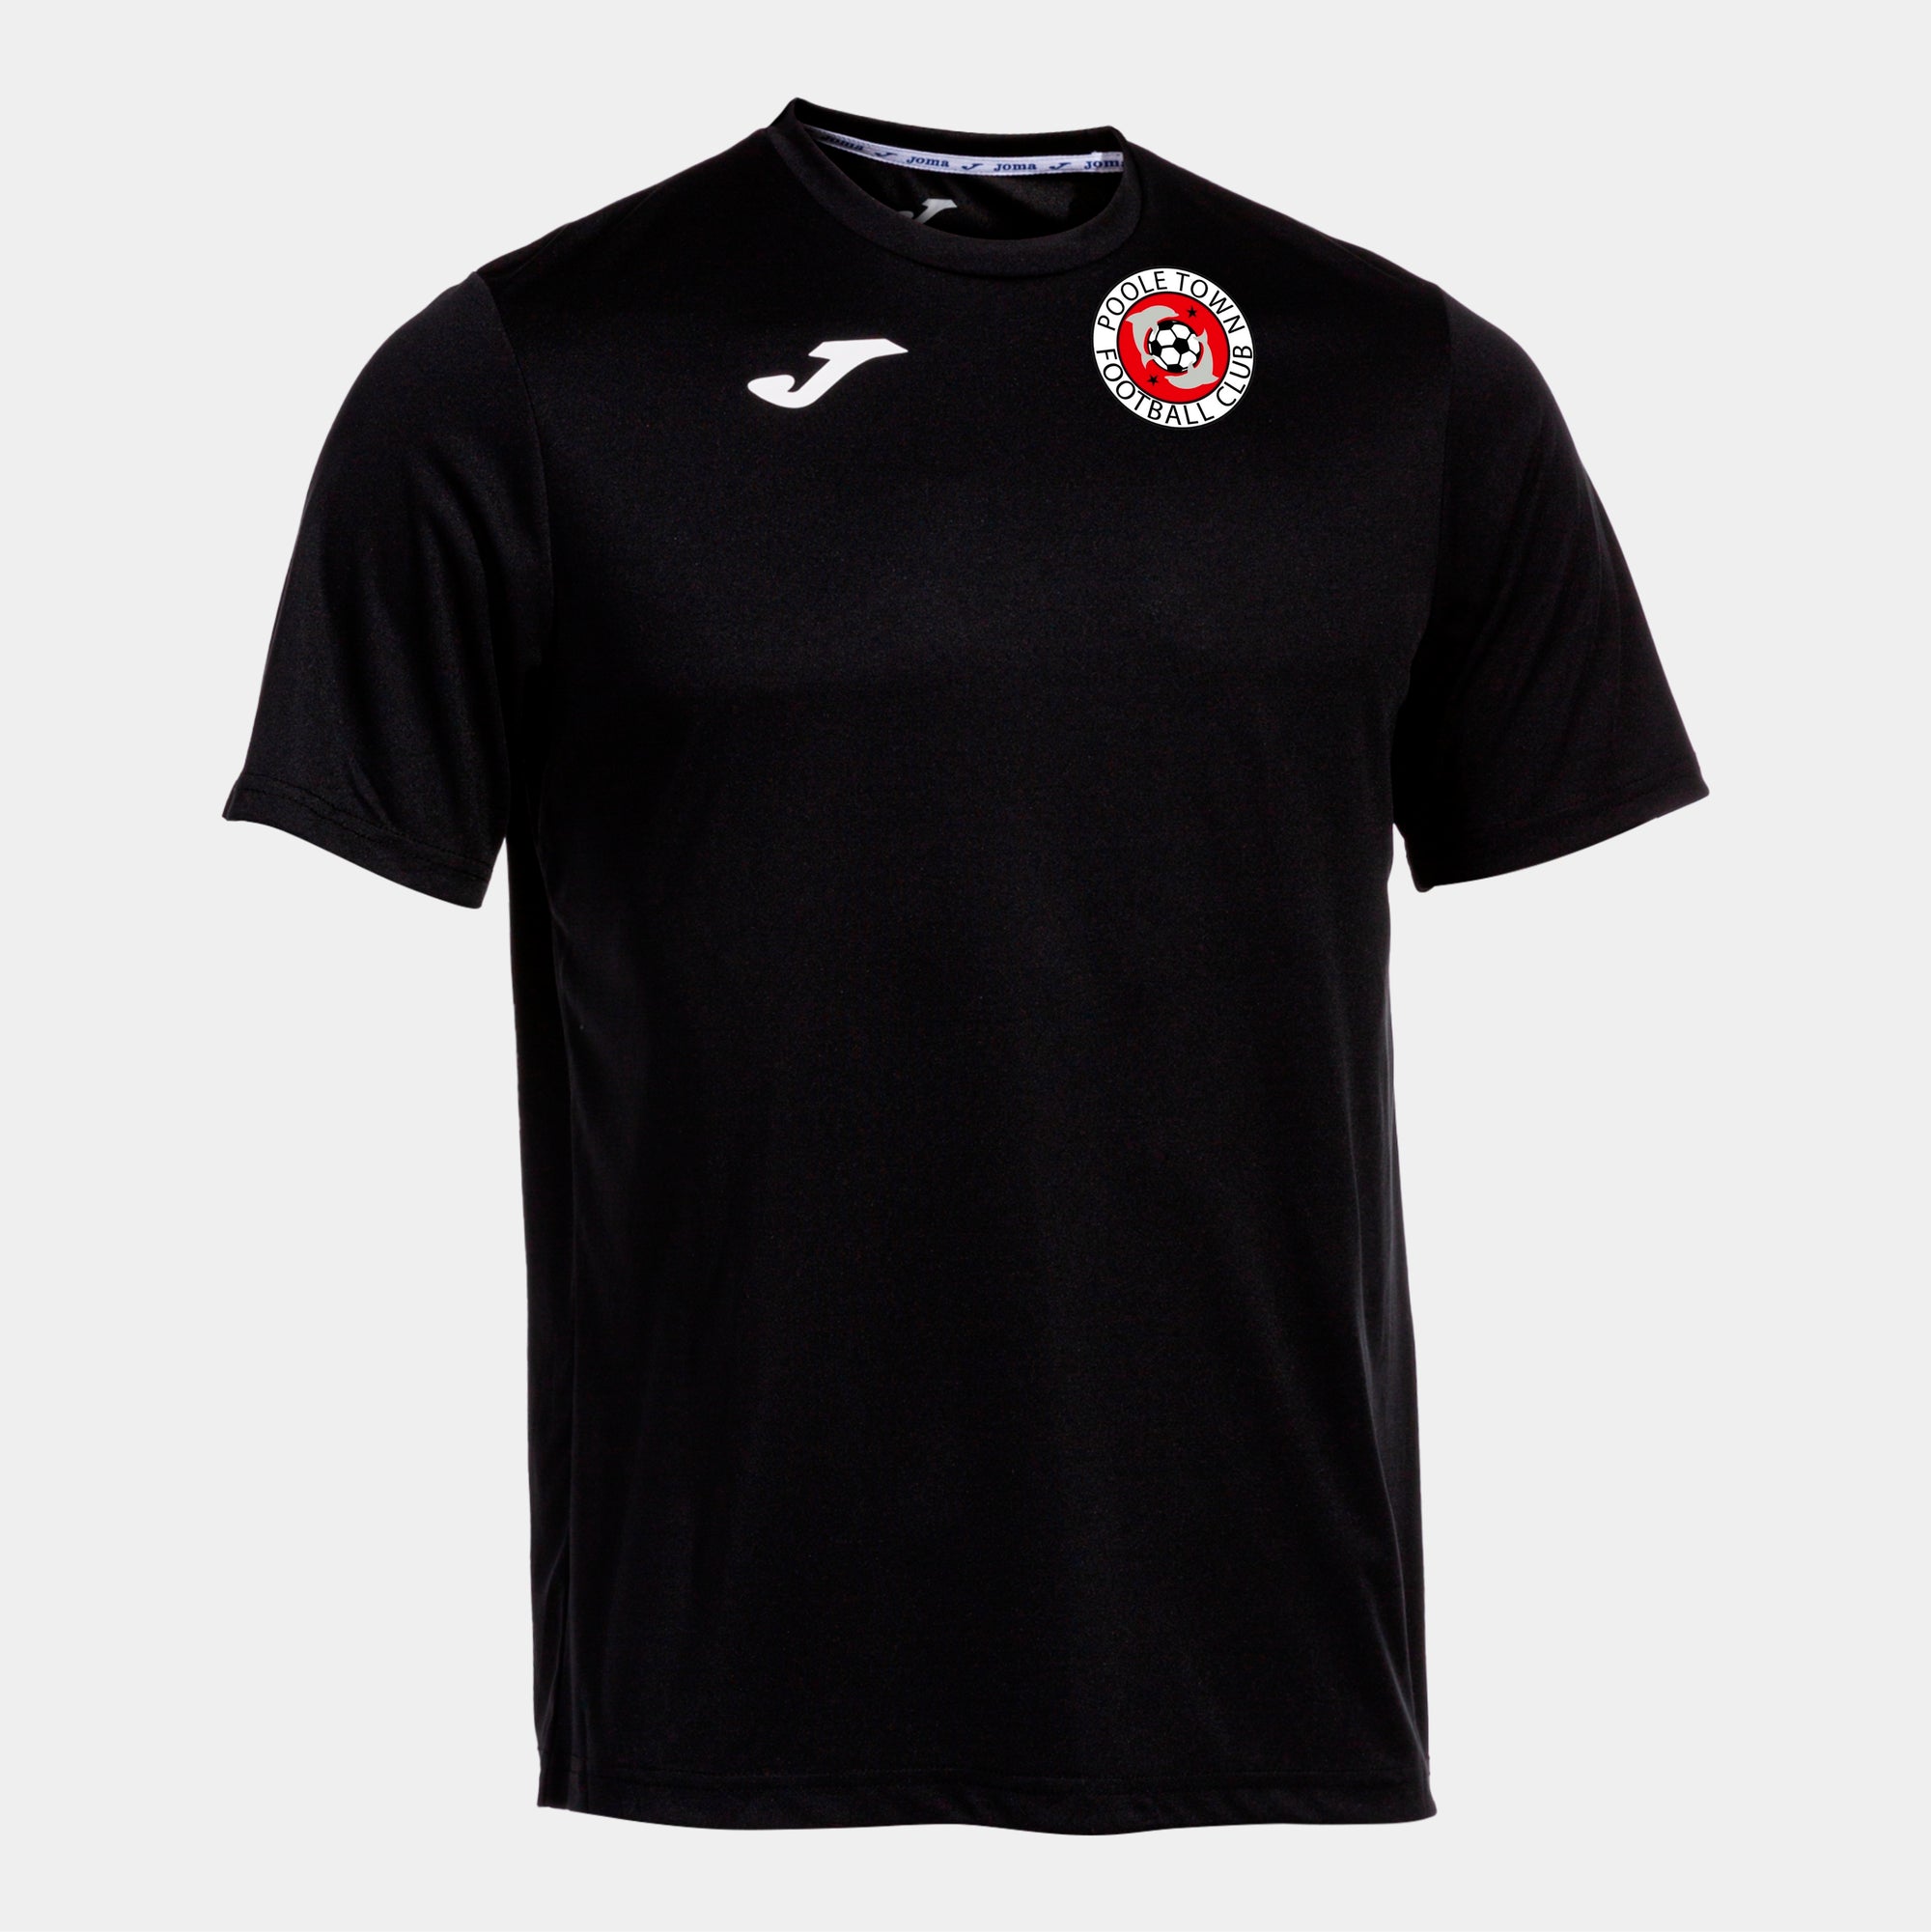 Poole Town Wessex - Joma Combi Short Sleeved T-Shirt - Black